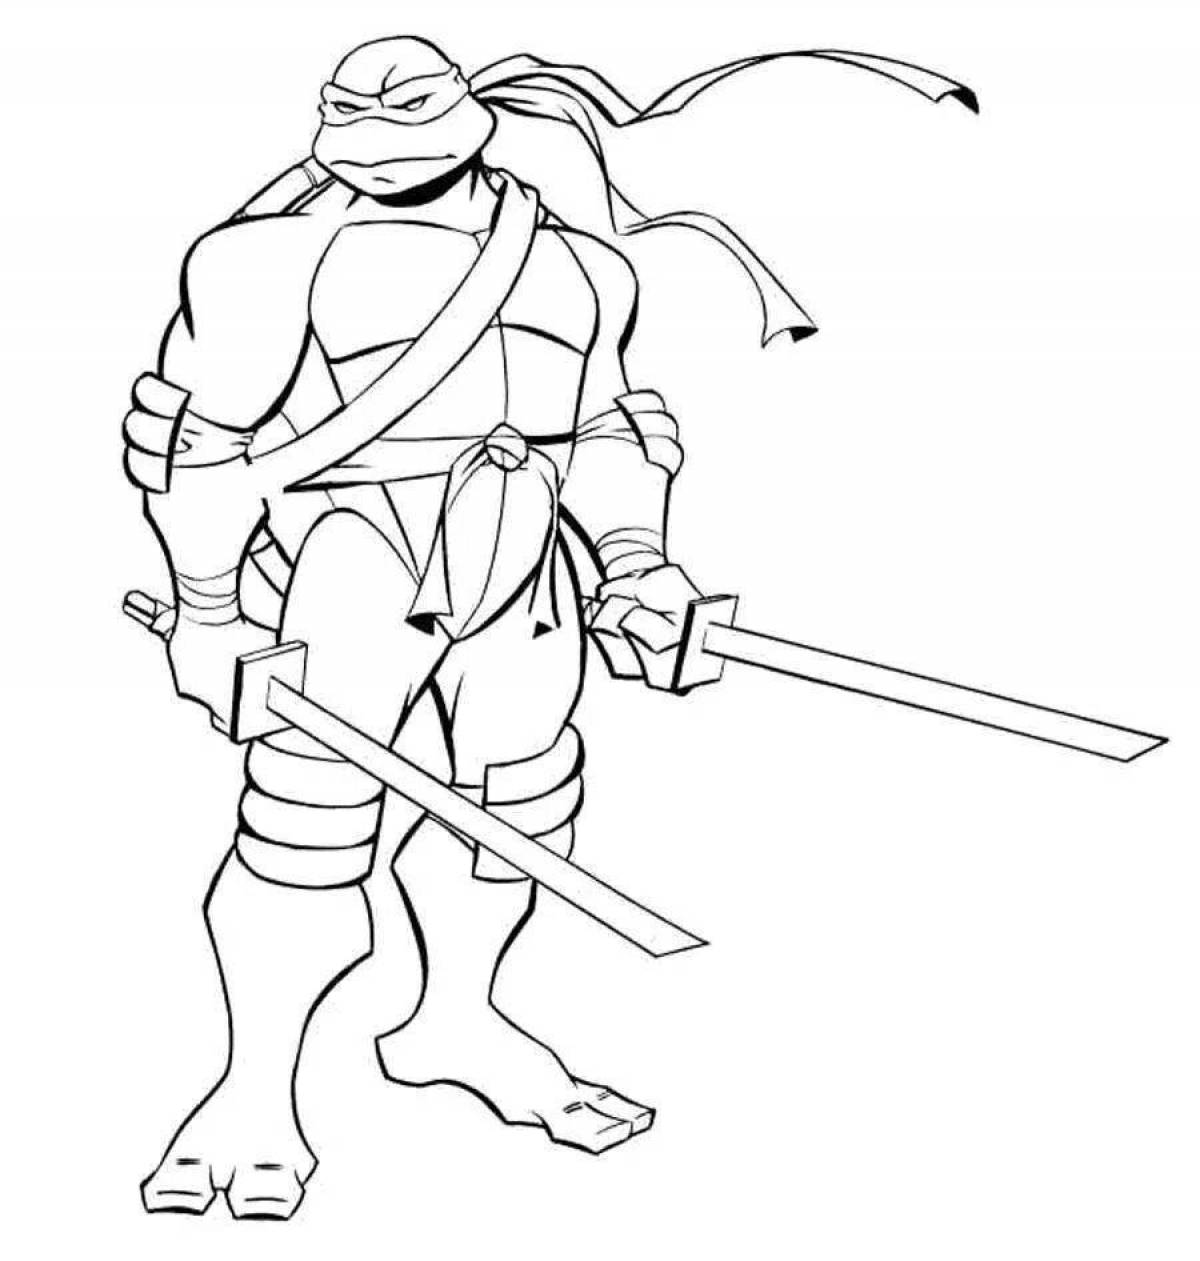 Fearless ninja coloring page for boys